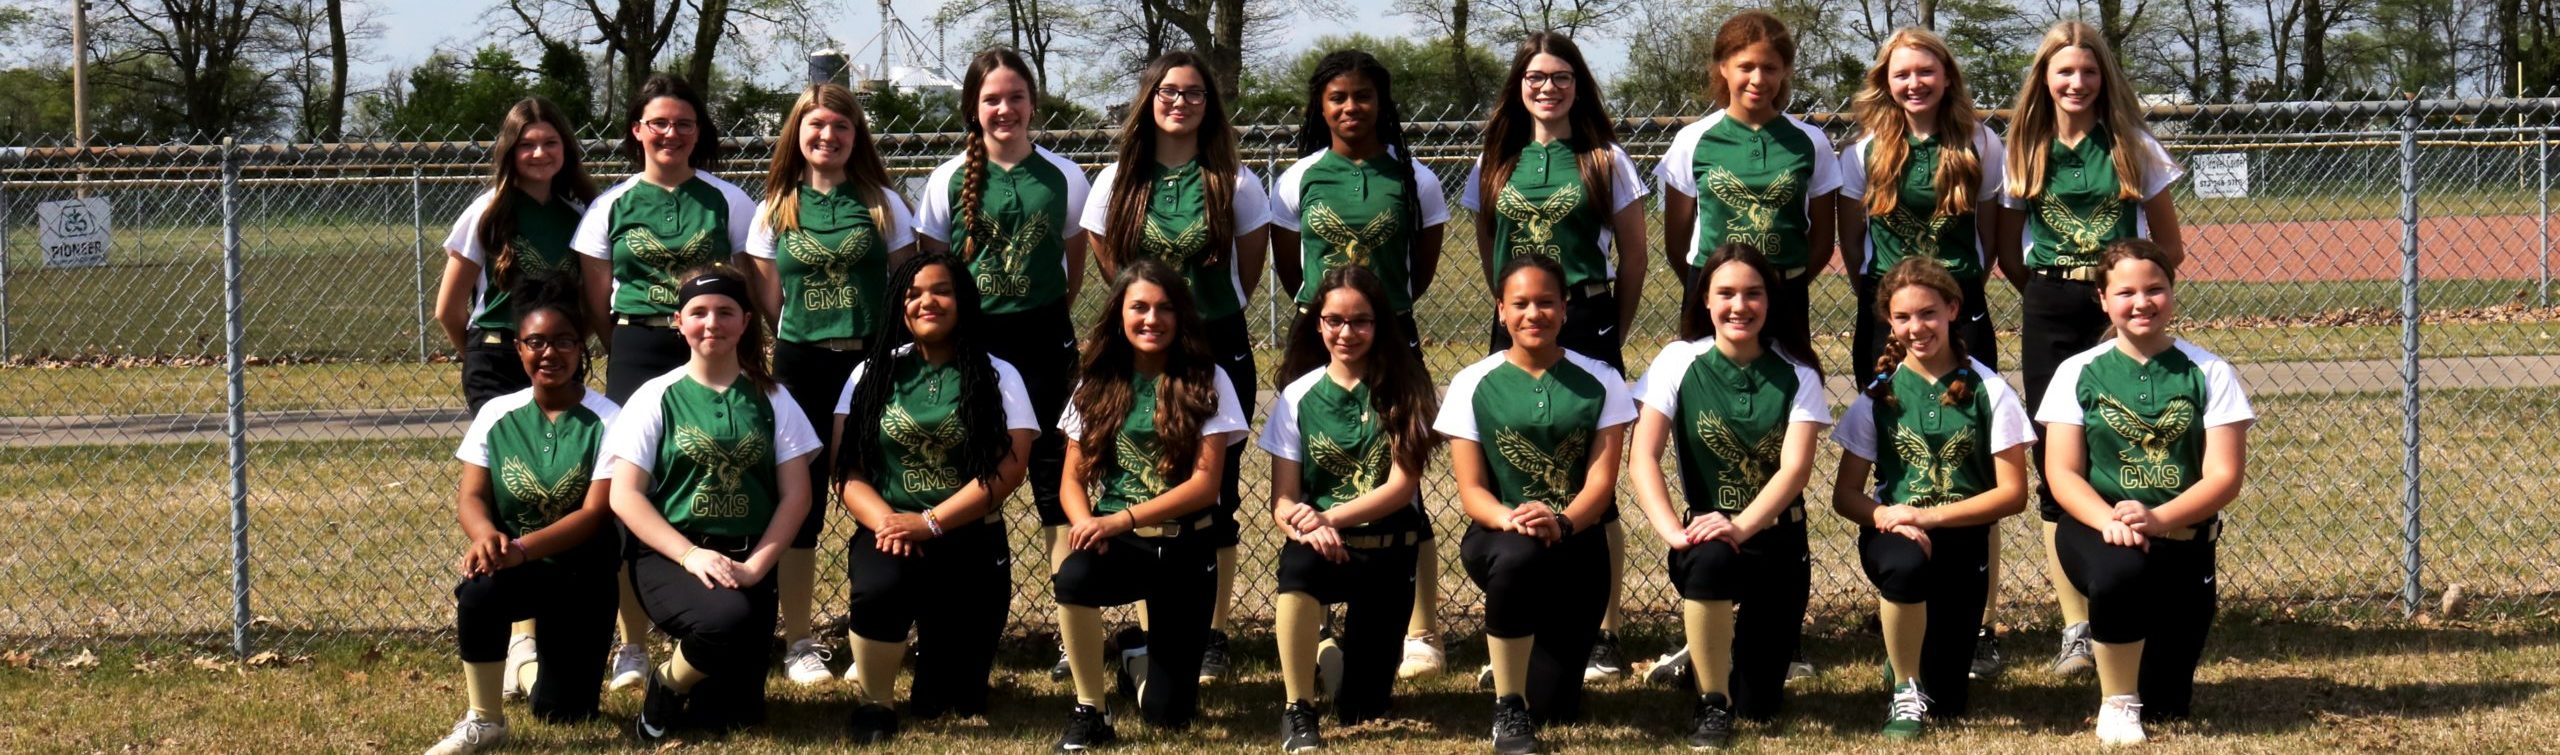 middle school softball team picture